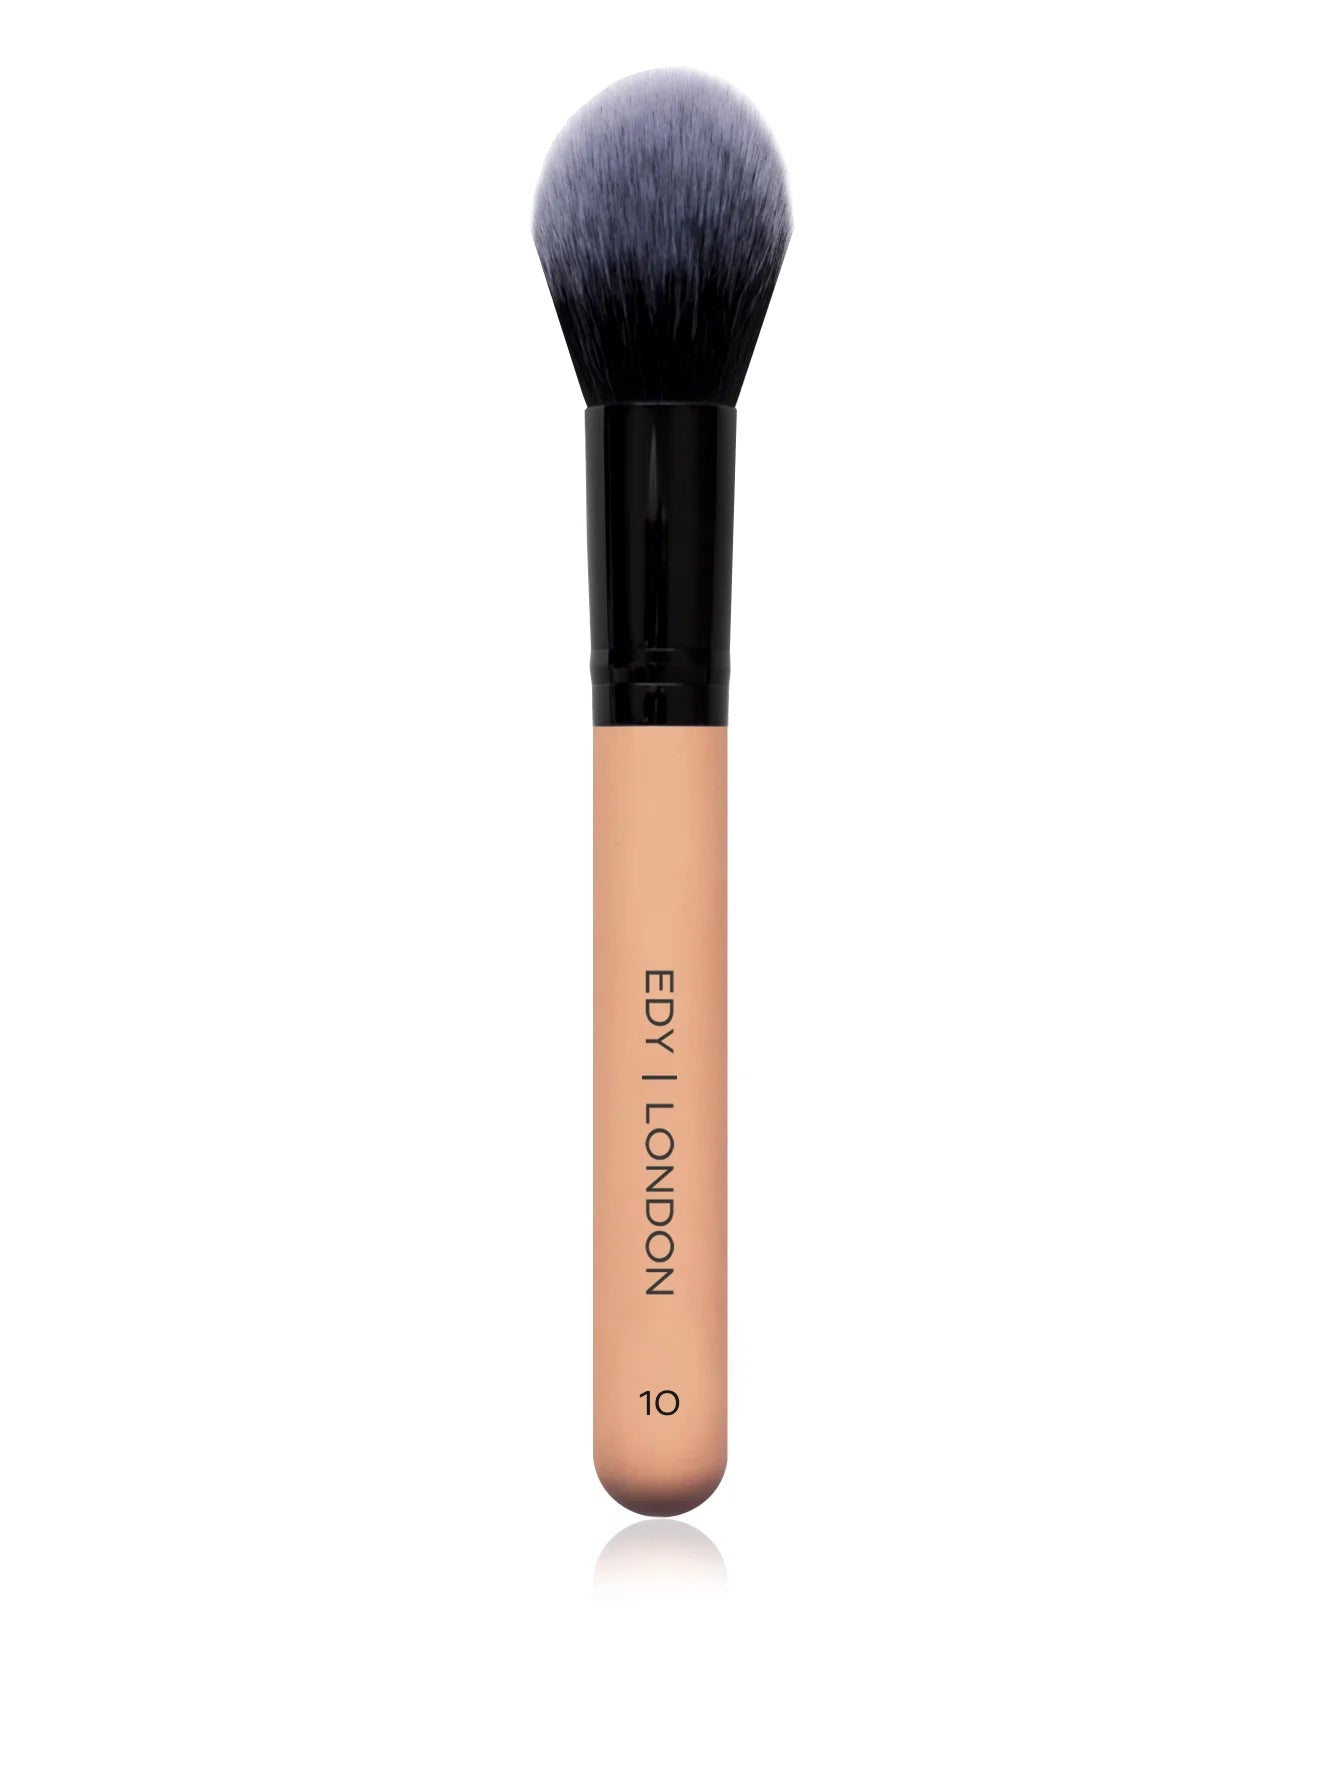 Tapered Face Brush 10 Make-up Brush EDY LONDON Pale Pink   - EDY LONDON PRODUCTS UK - The Best Makeup Brushes - shop.edy.london